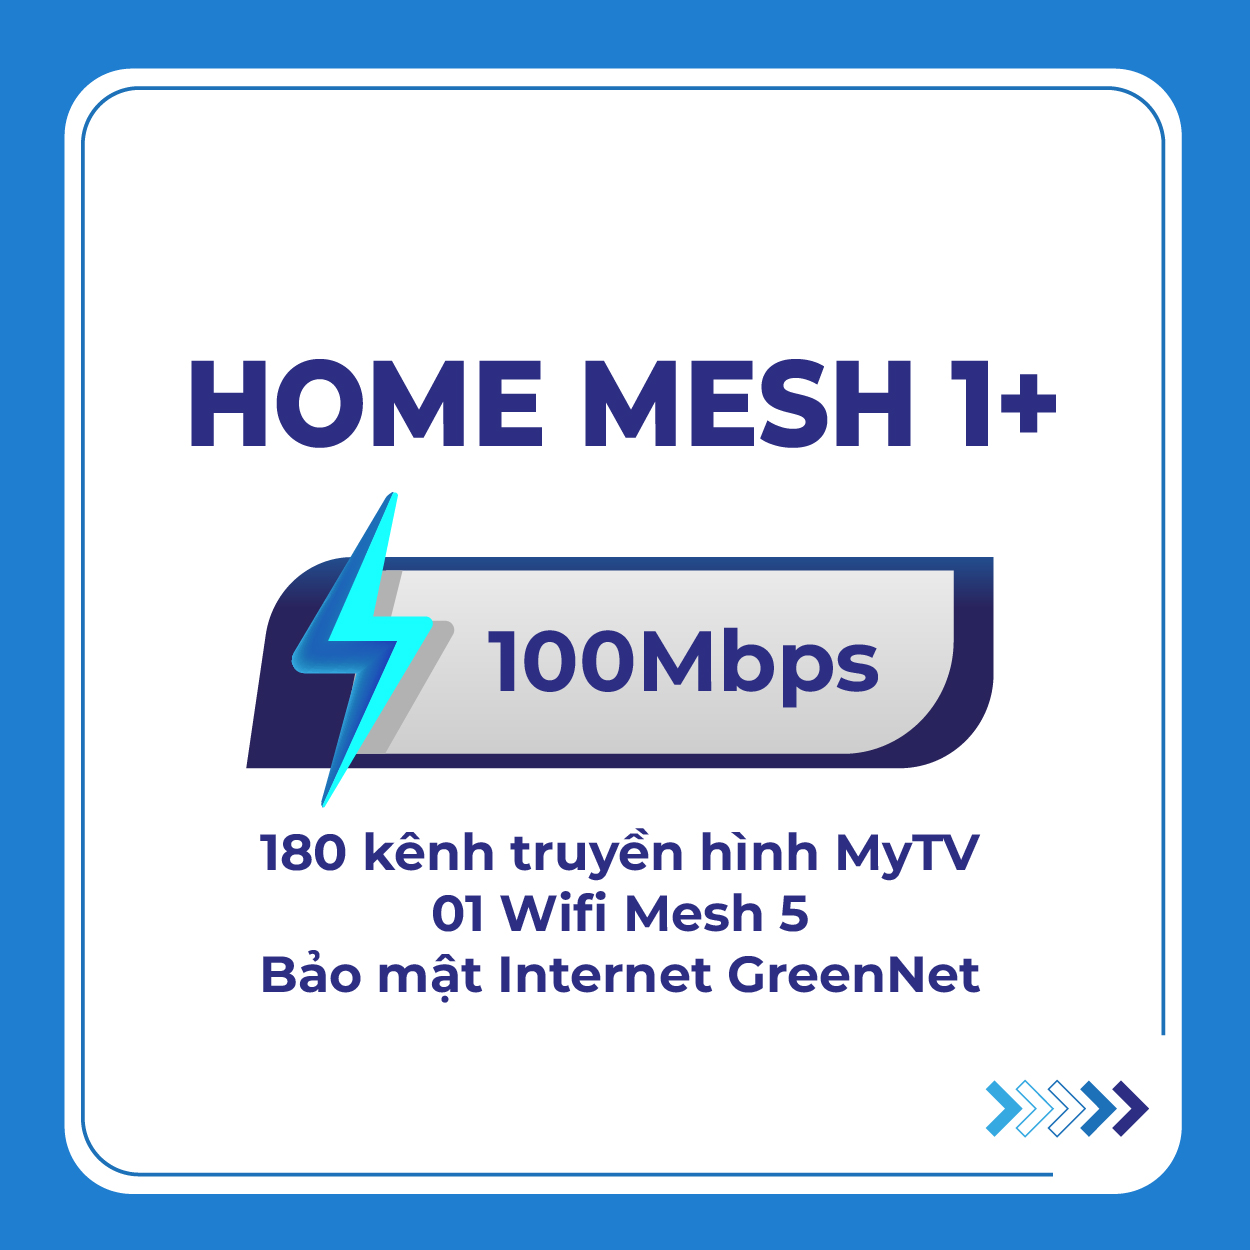 HOME MESH 1+_NgT